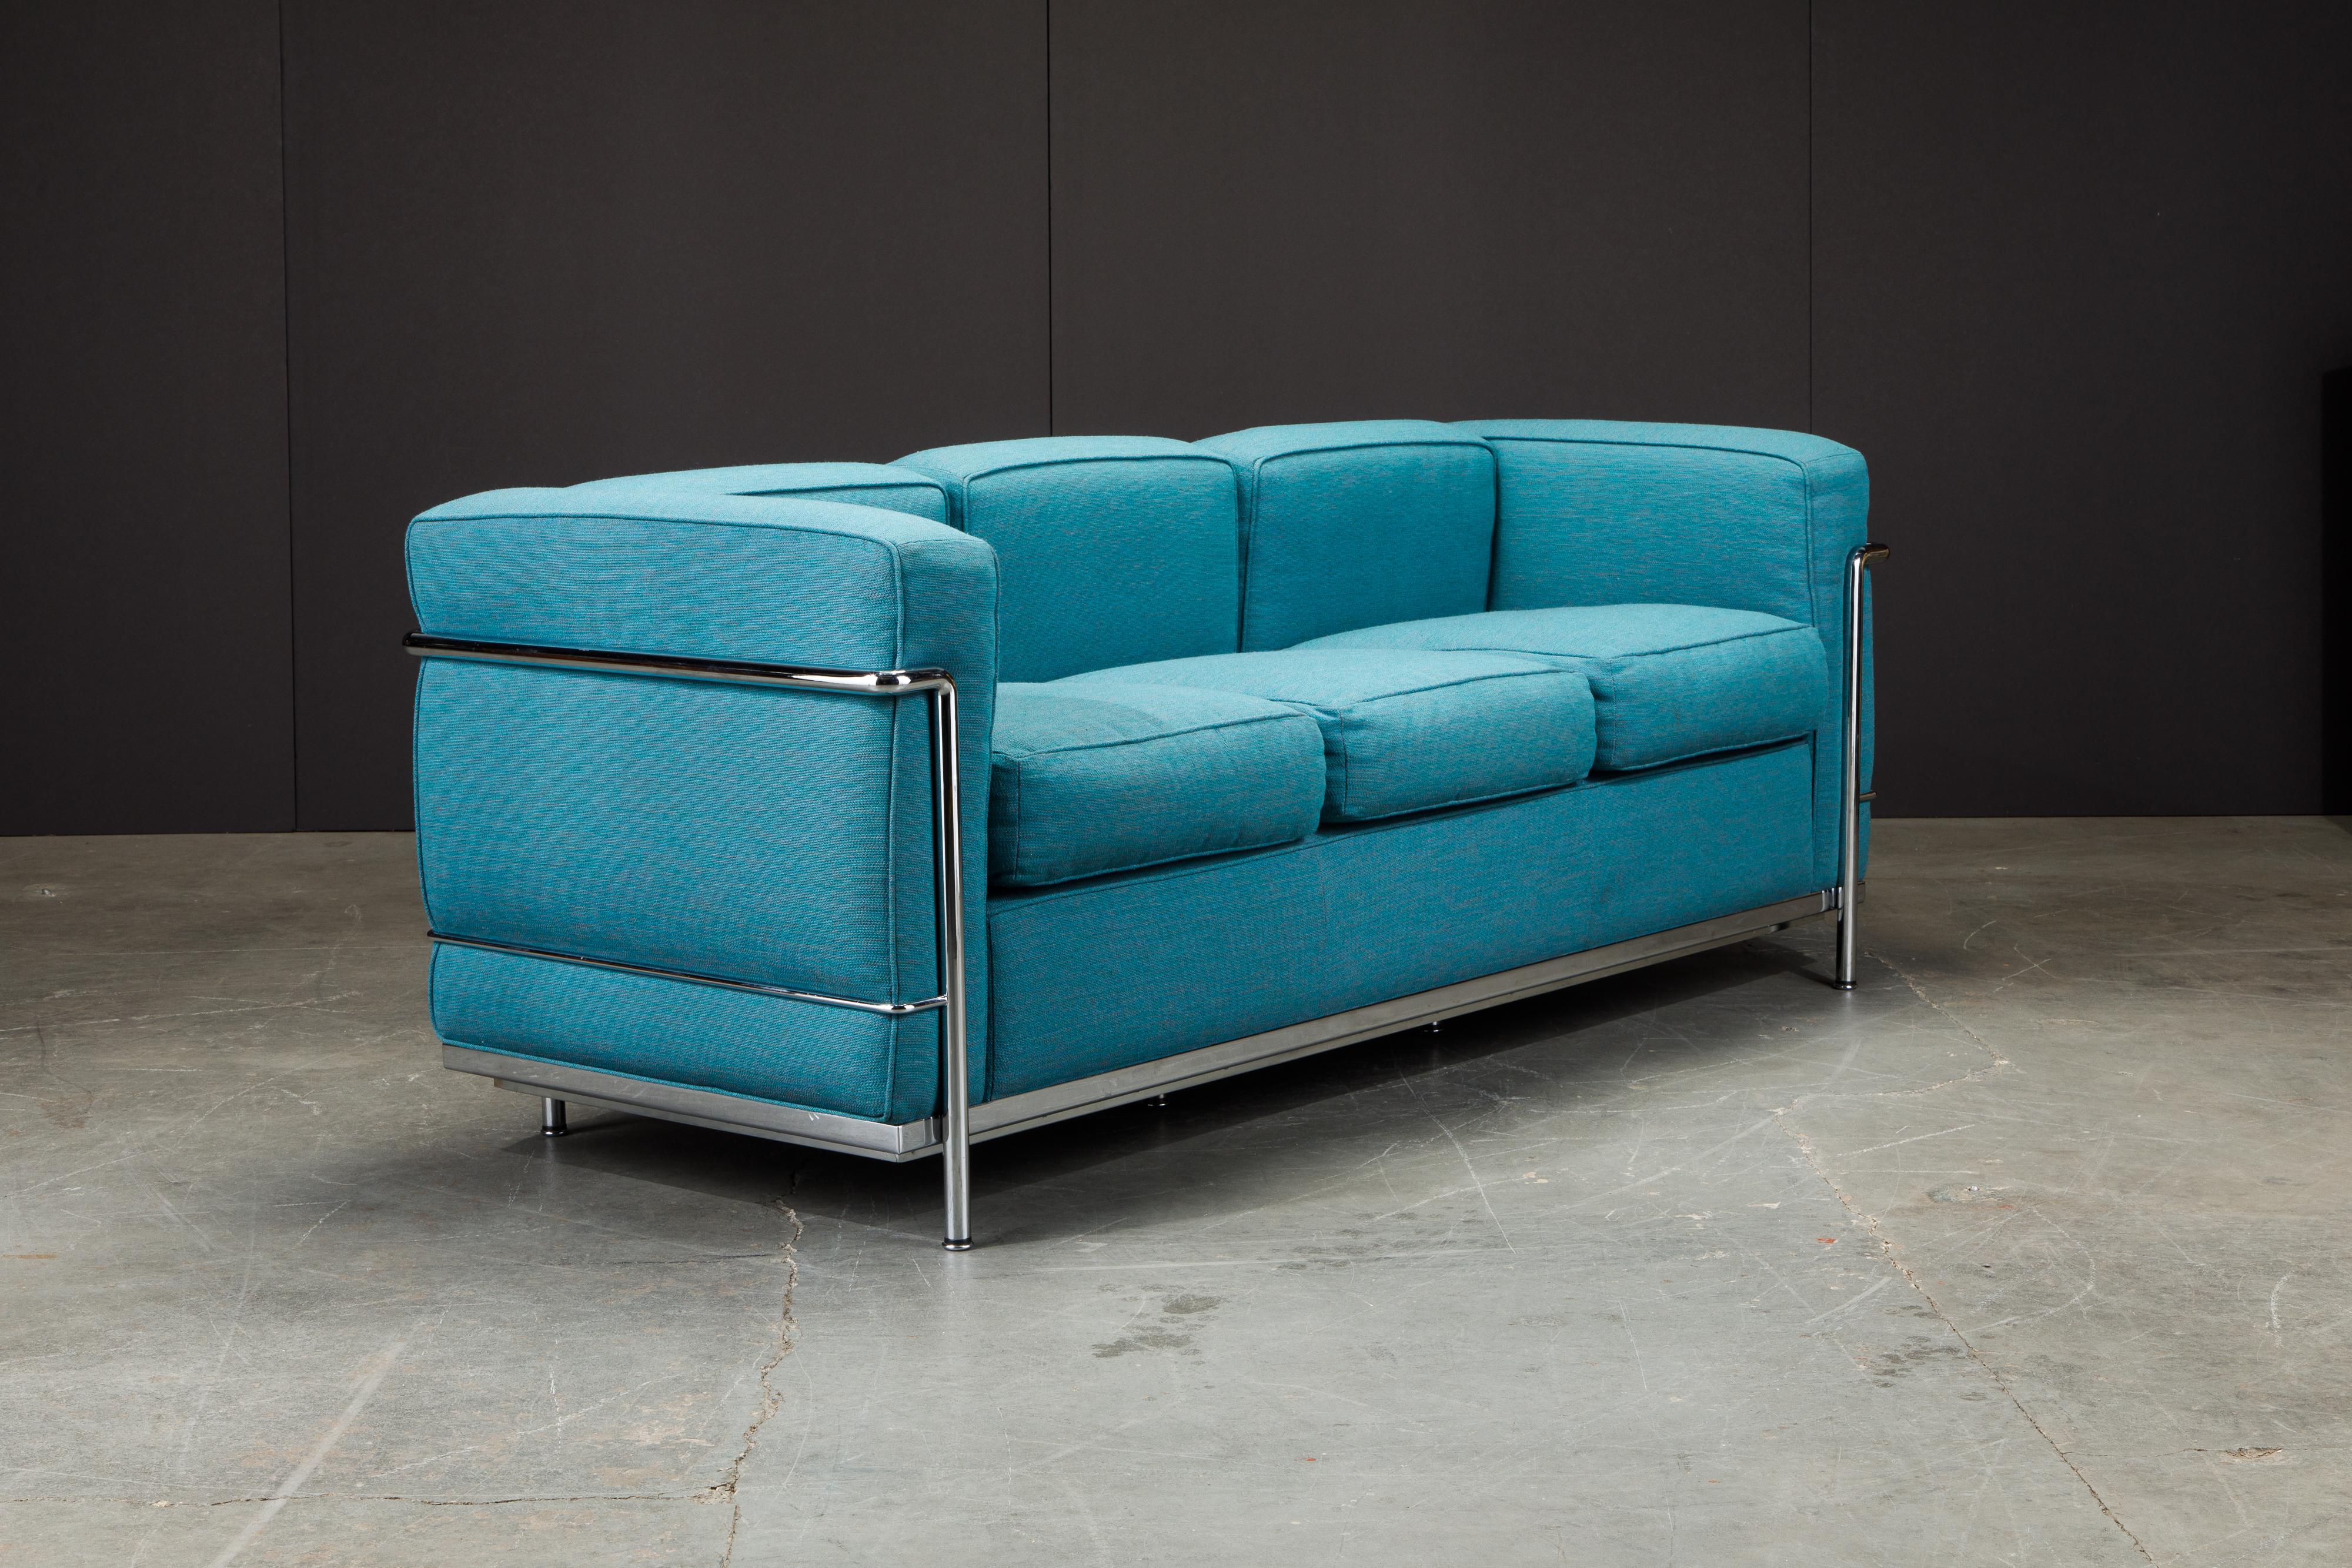 Contemporary 'LC2' Three-Seat Sofa by Le Corbusier, Jeanneret & Perriand for Cassina, Signed